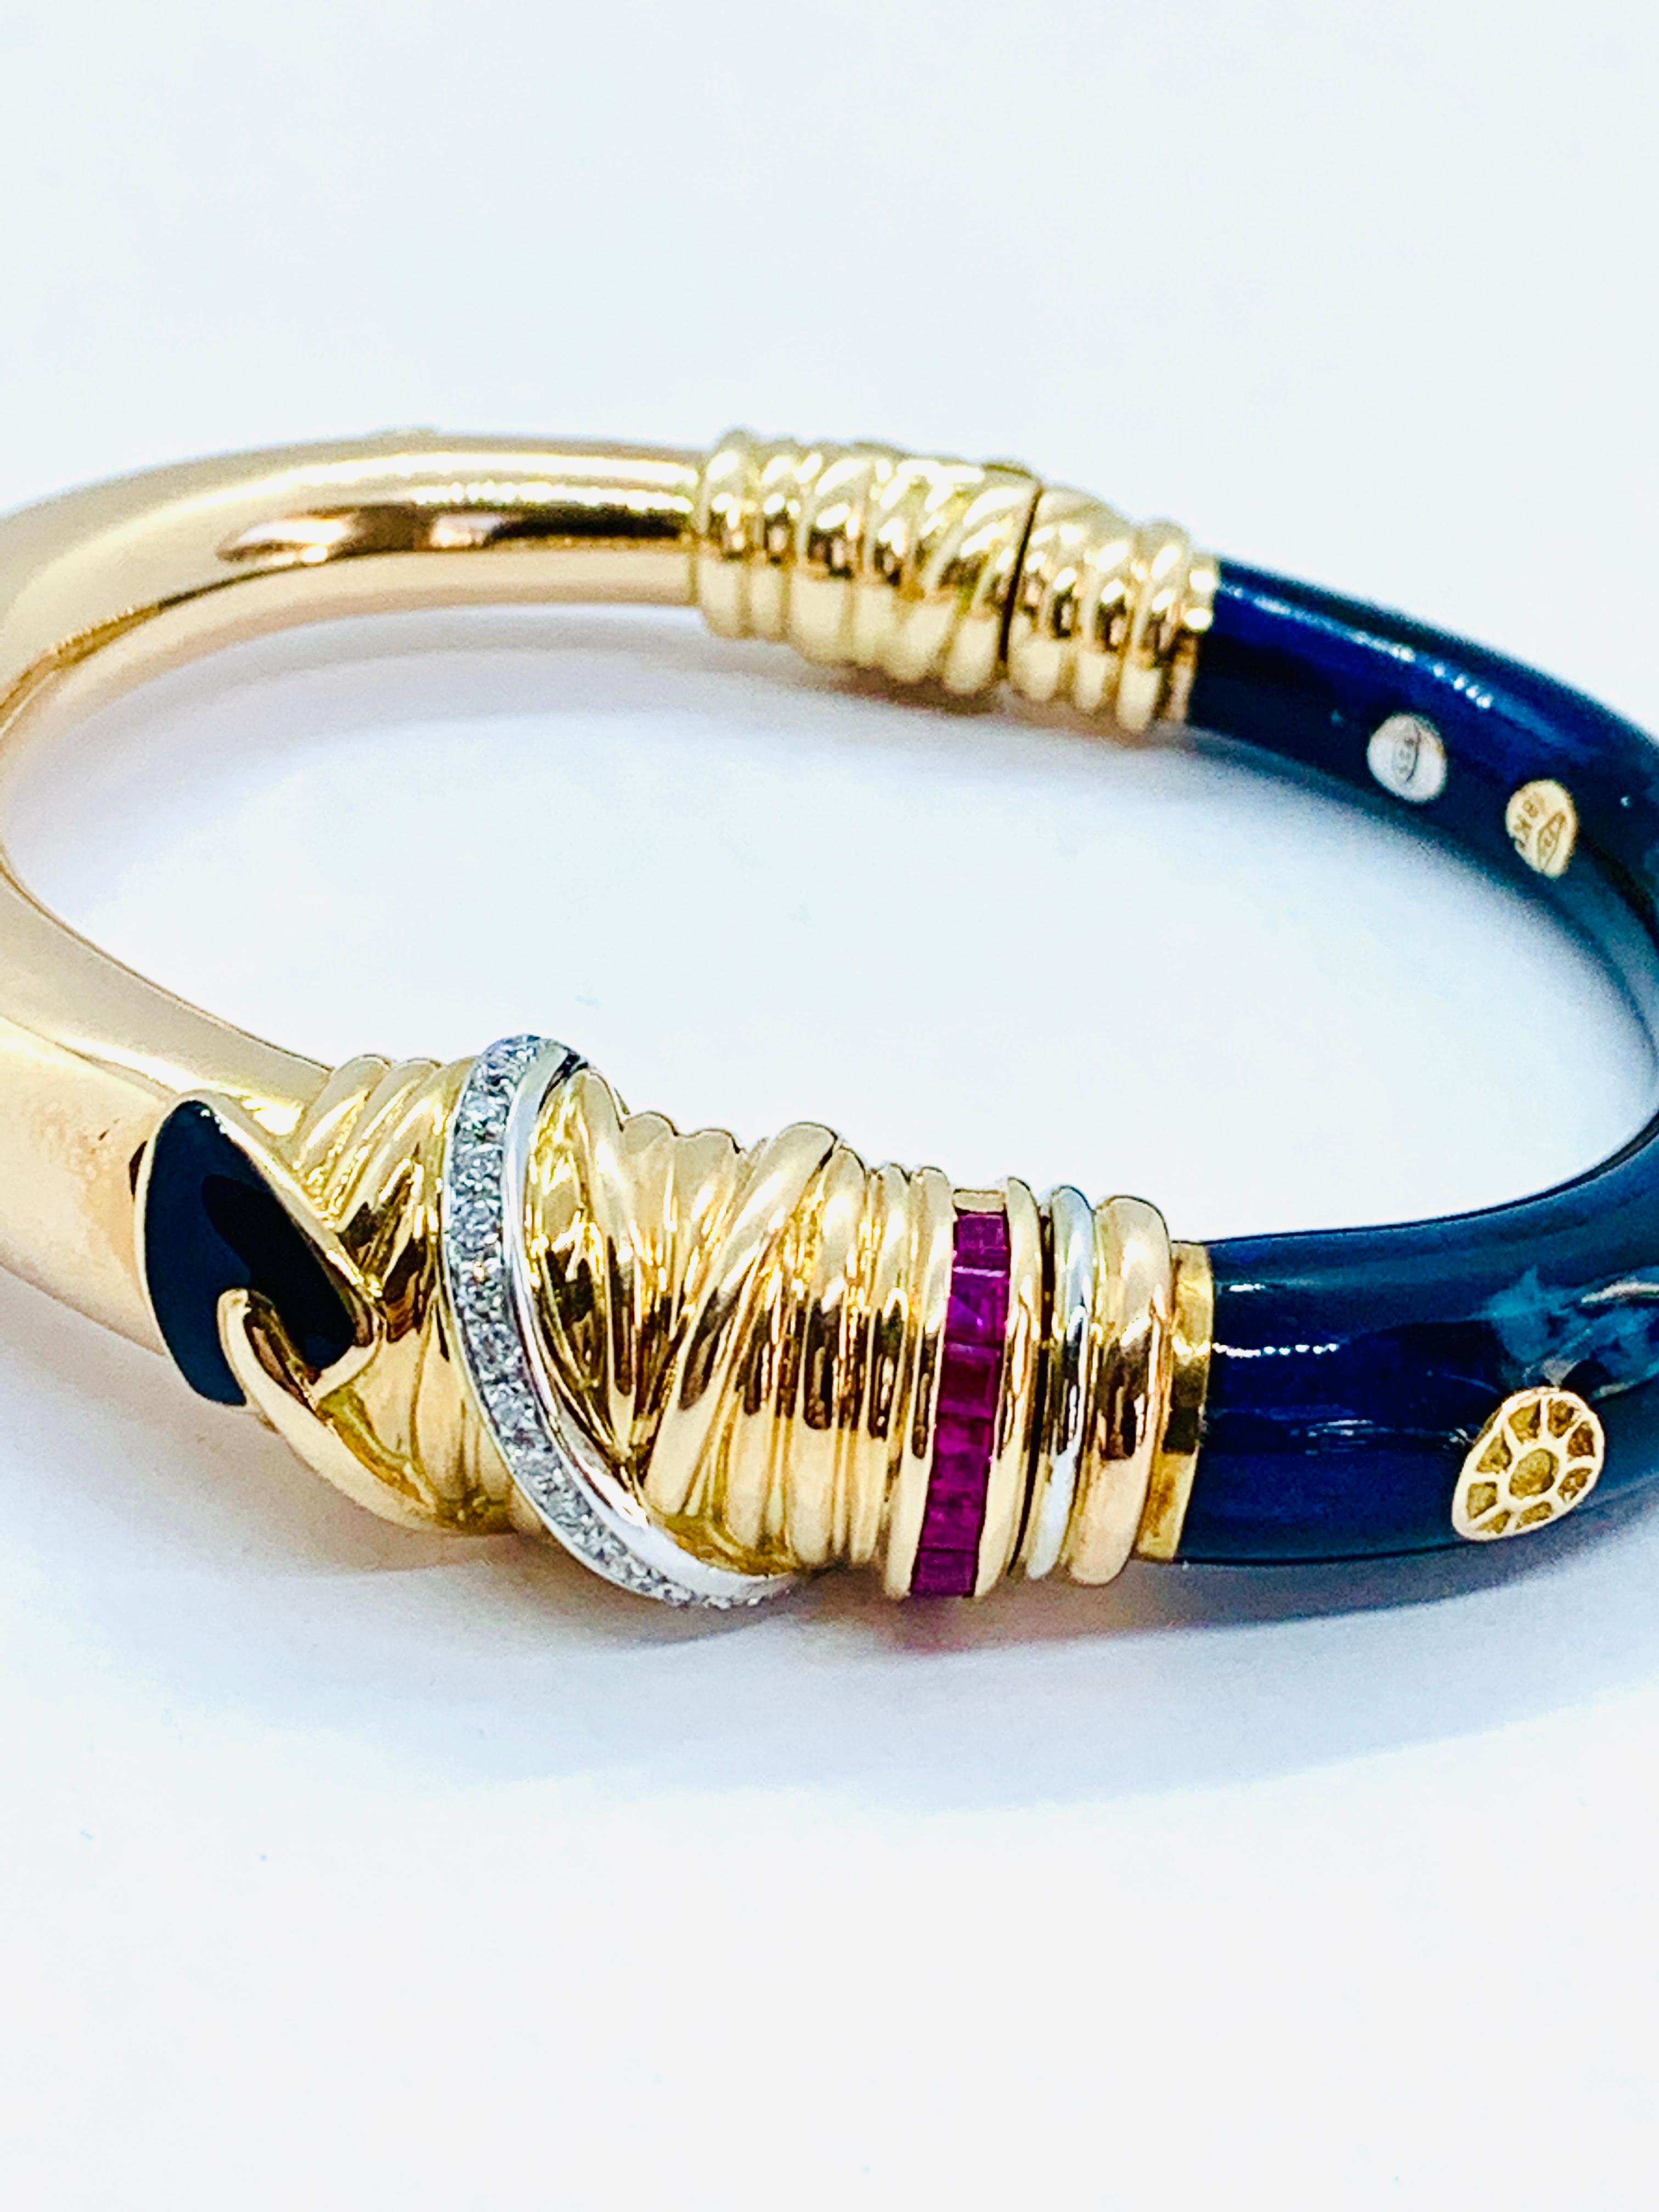 Gorgeous La Nouvelle Bague Bangle Bracelet. Made in 18K Yellow Gold and sterling silver with a single brand of square baguette rubies as well as a band of 16 diamonds.. One side has gorgeous Blue enamel. Will fir up to a 6 inch wrist and weighs 49.6